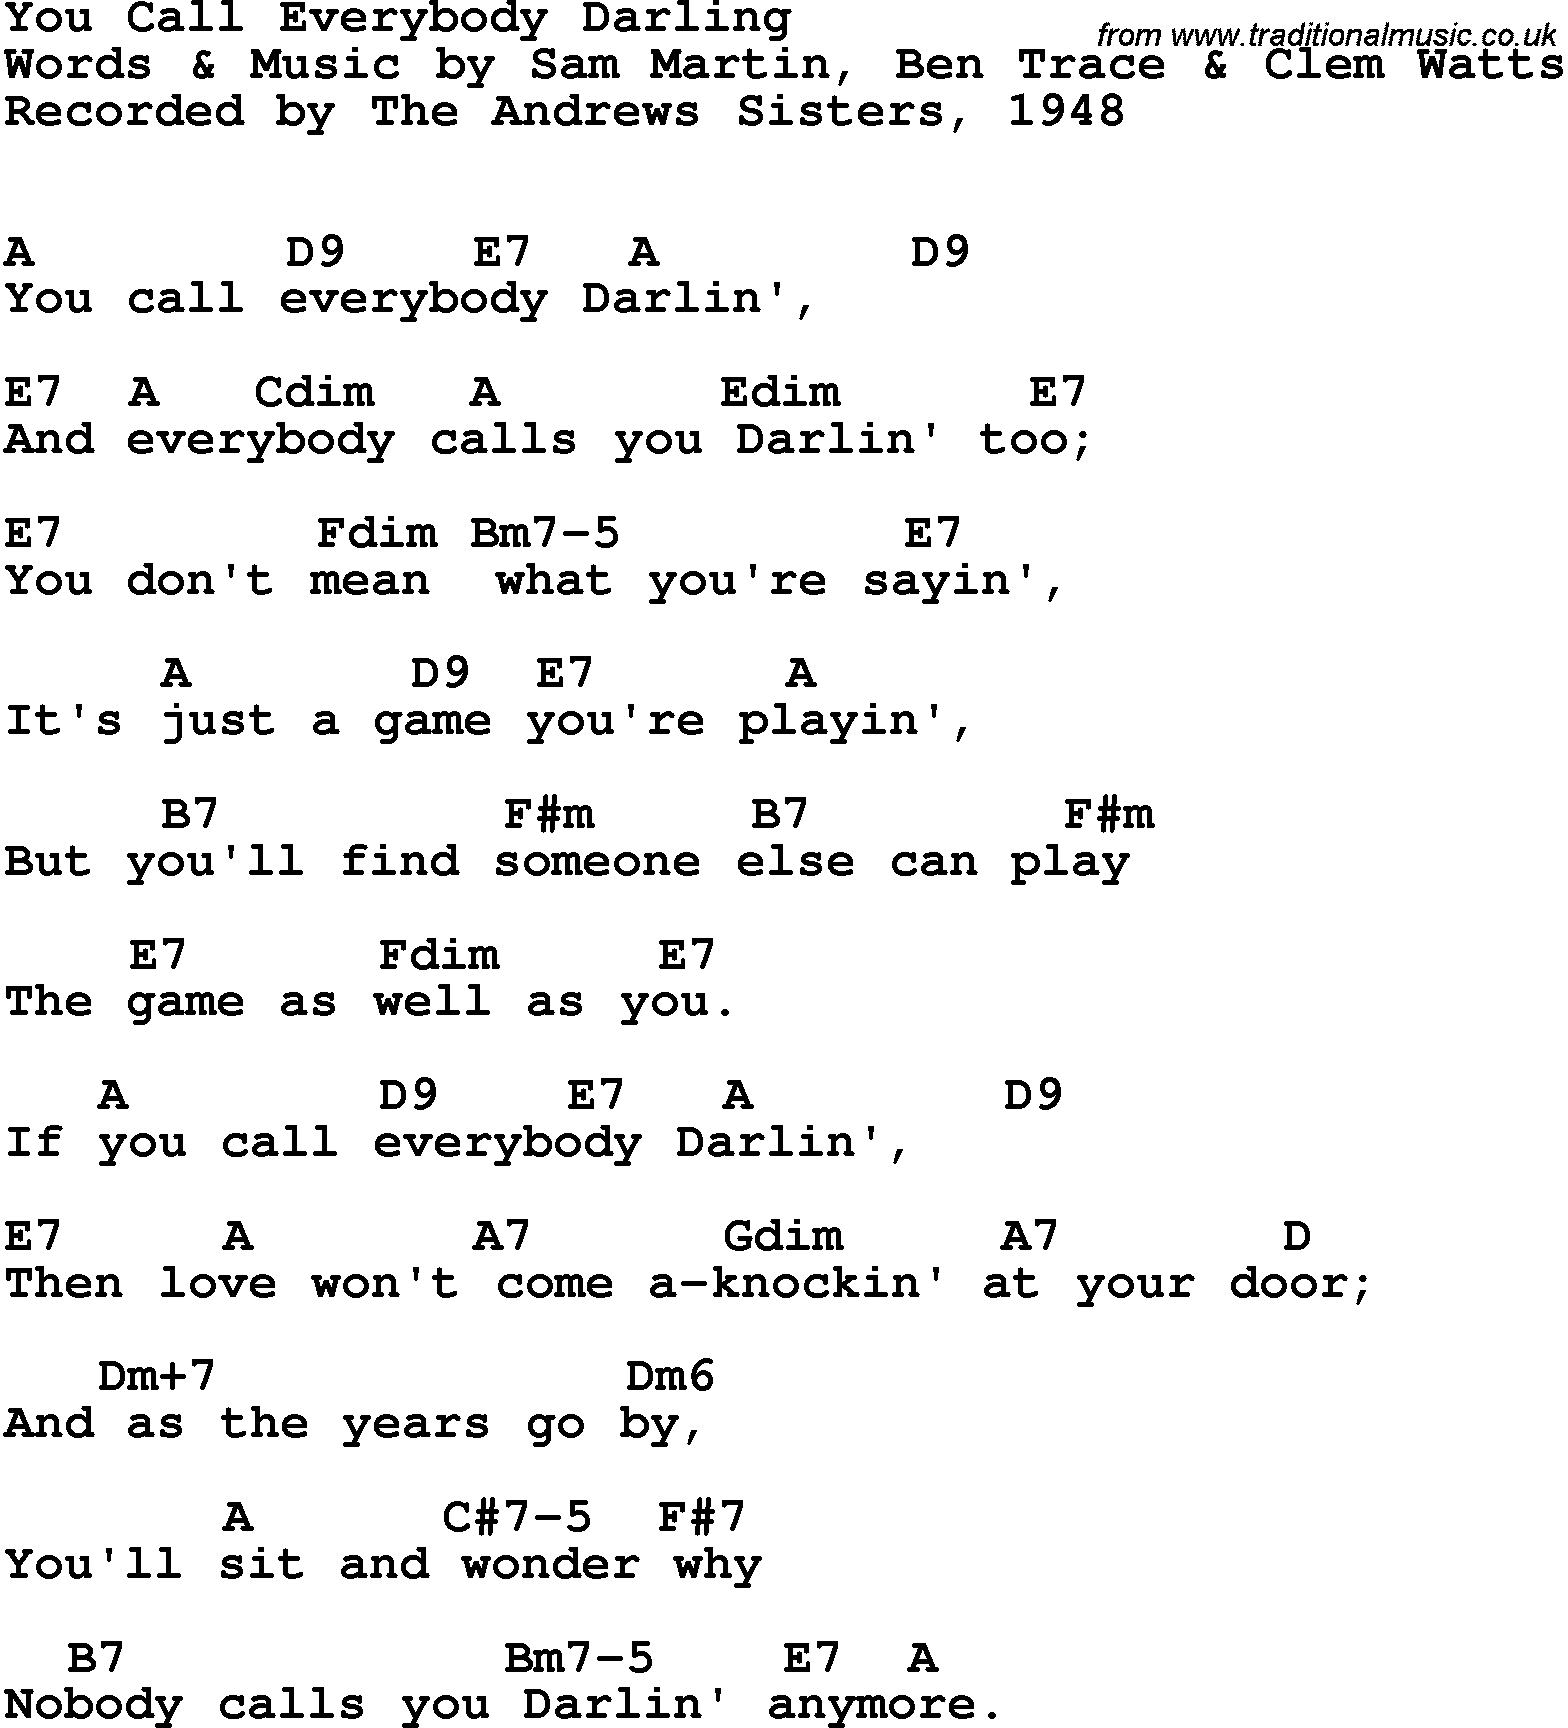 Song Lyrics with guitar chords for You Call Everybody Darling - The Andrews Sisters, 1948